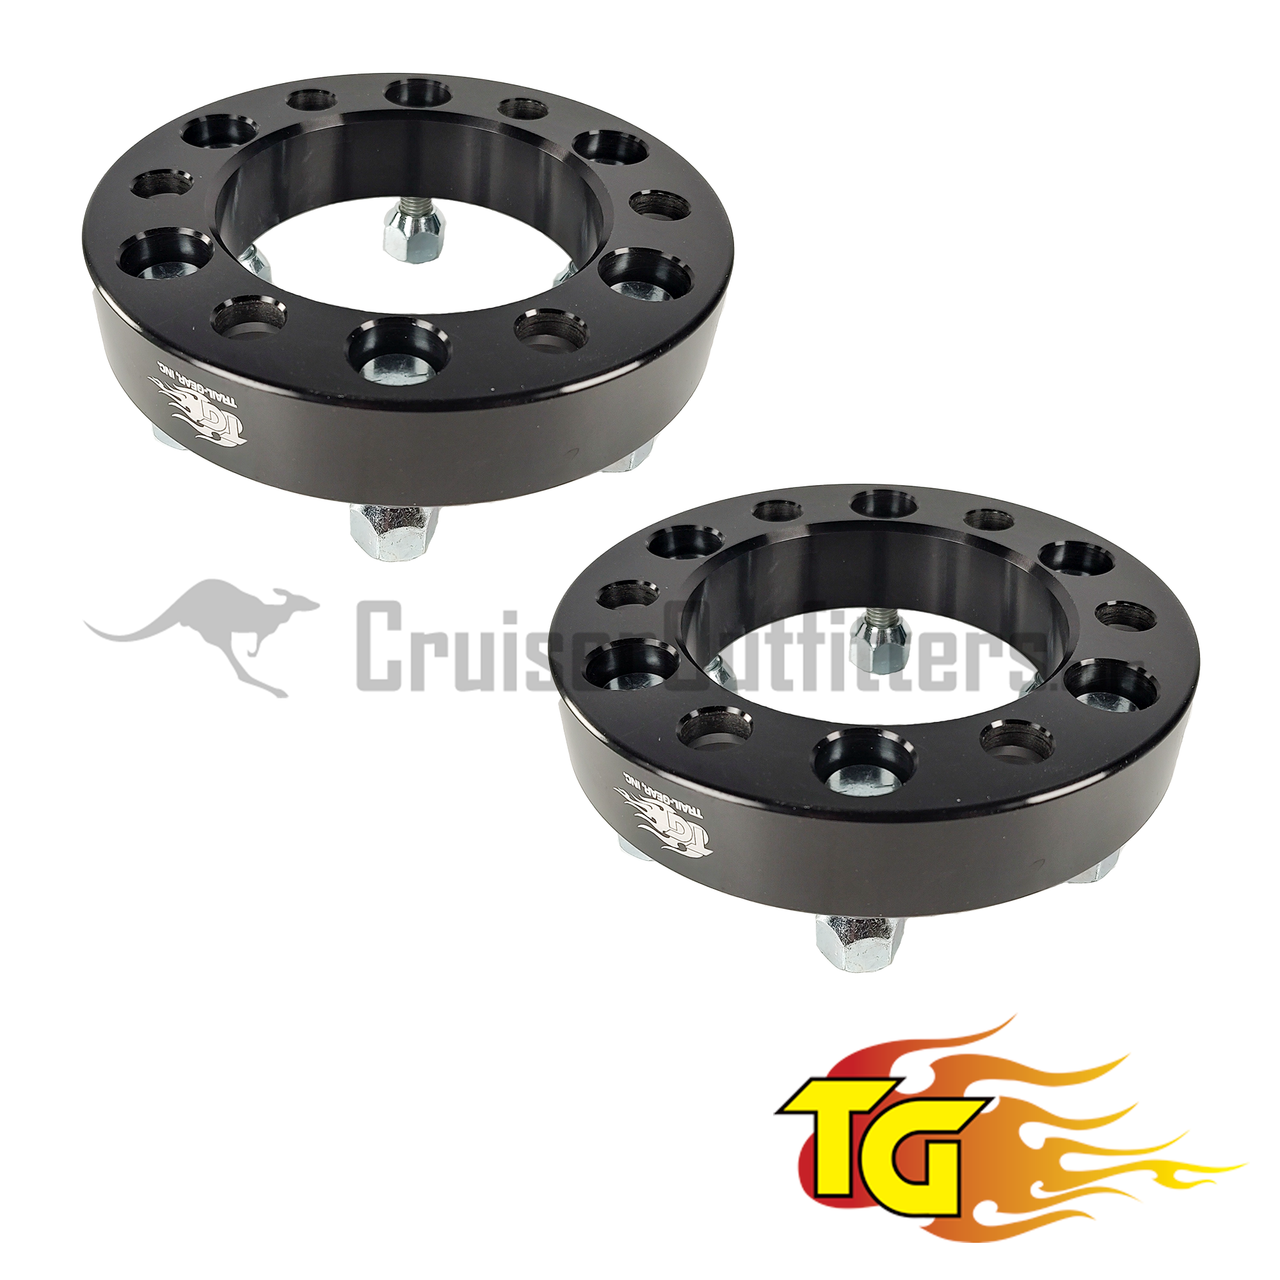 Wheel Spacers 1.25" - Fits Lug Centric 4x/6x 6x5.5" Pattern Applications (WHLSPAC125)